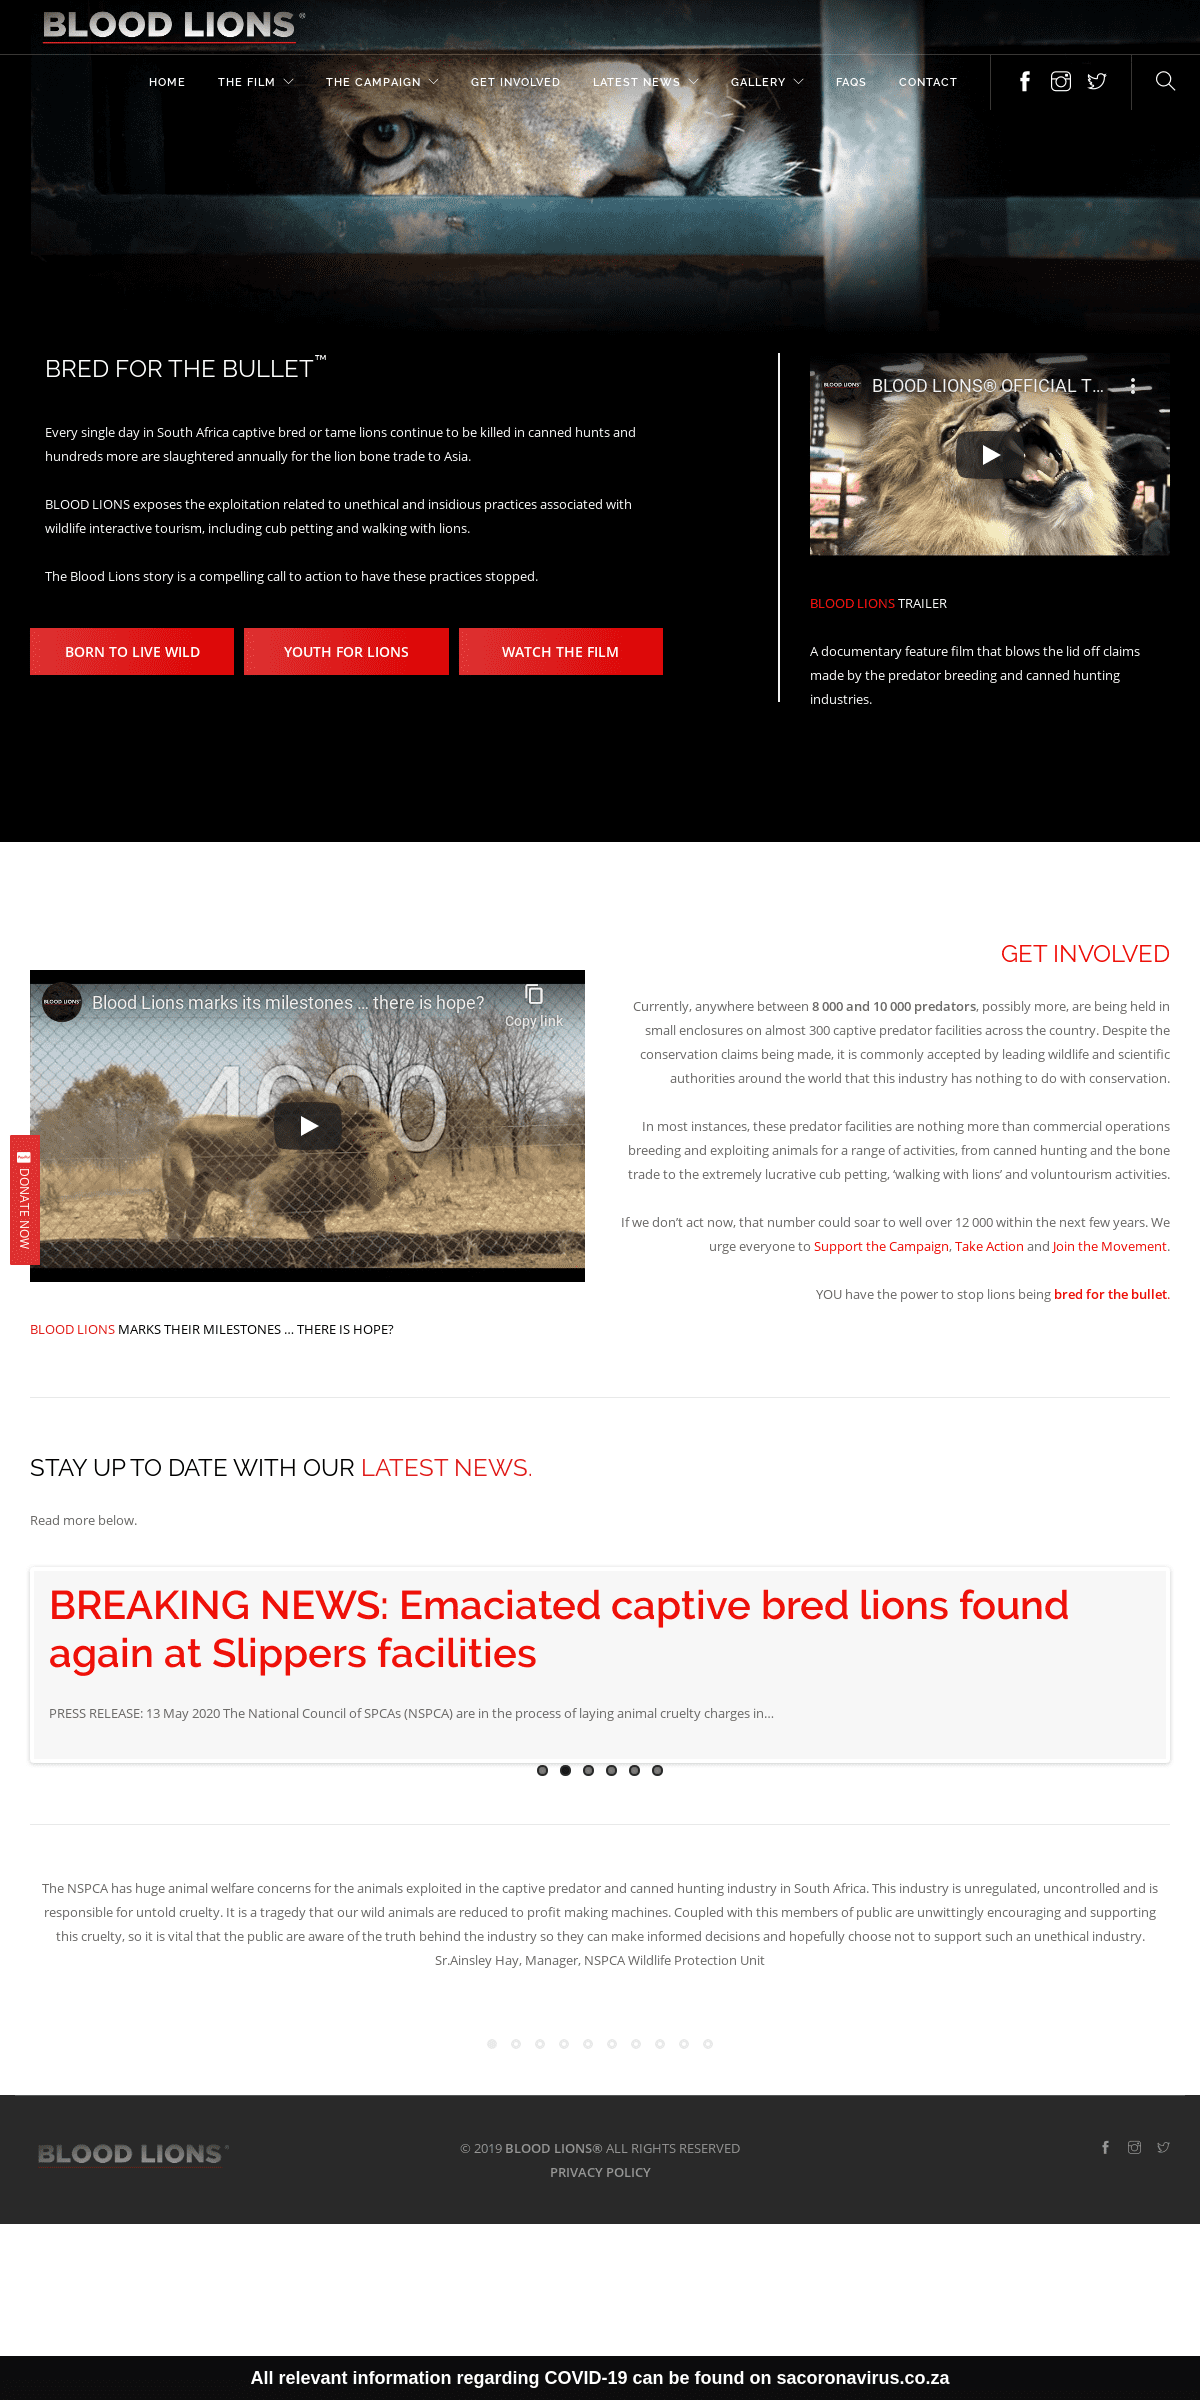 A complete backup of bloodlions.org